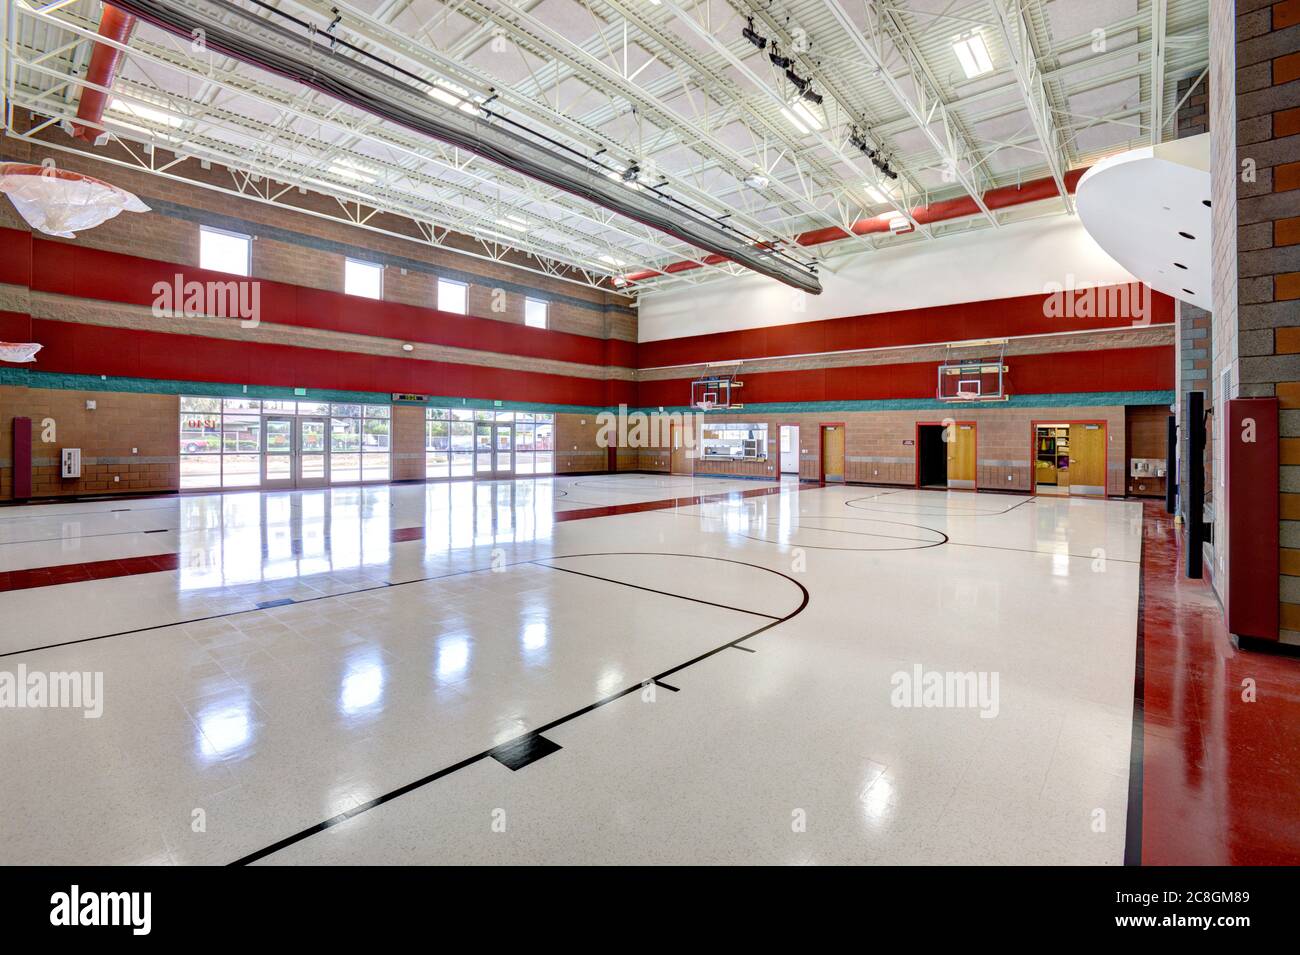 Idaho Falls, Idaho, USA Aug. 19, 2014 The multipurpose room in a miodern elementary school, which functions as a gym, lunchroom, meeting room, and the Stock Photo